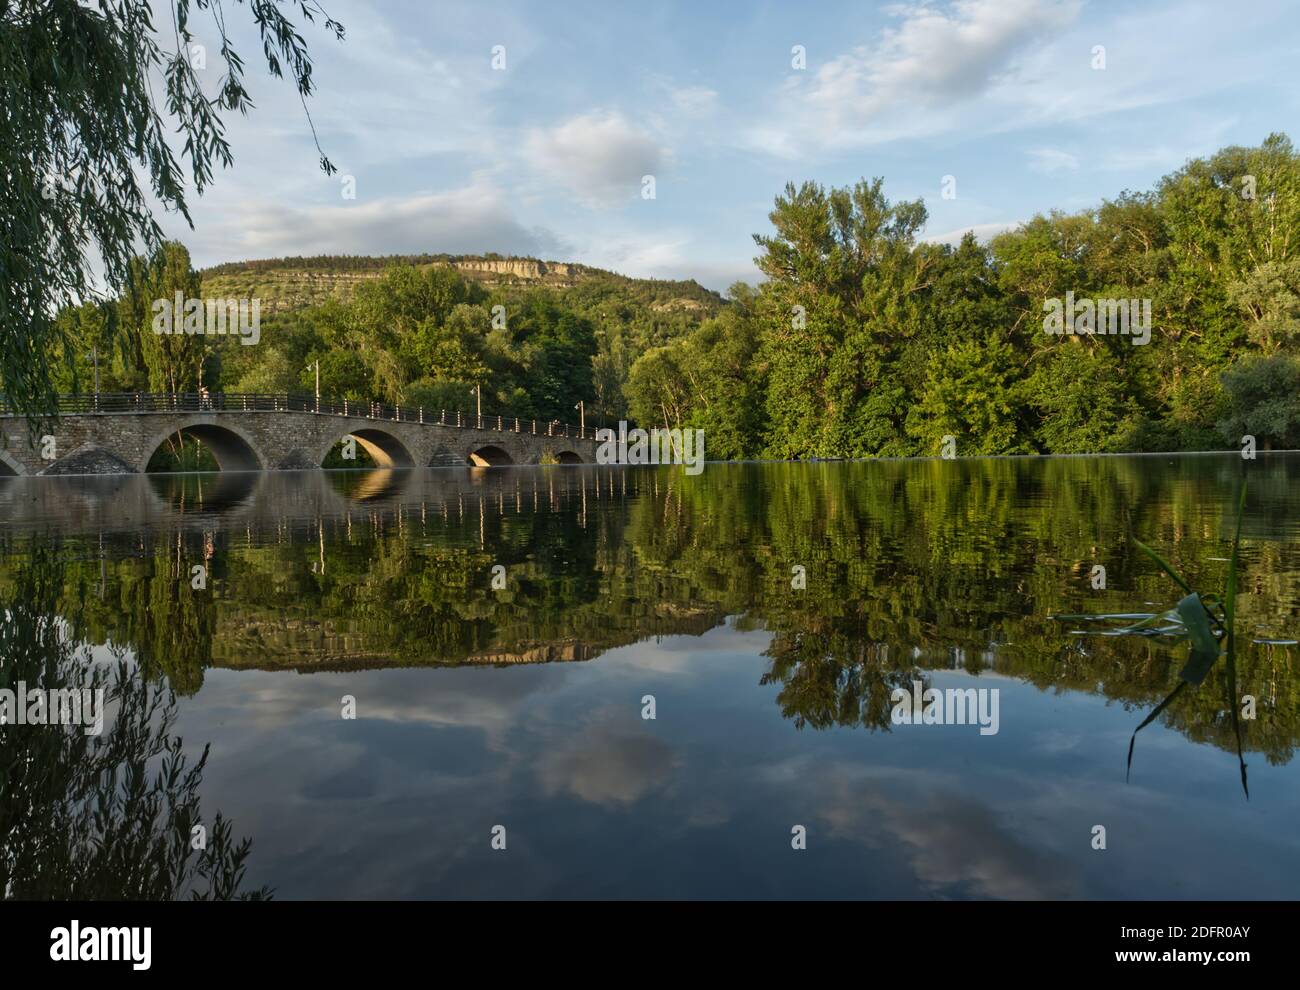 A landscape picture in jena at summer Stock Photo